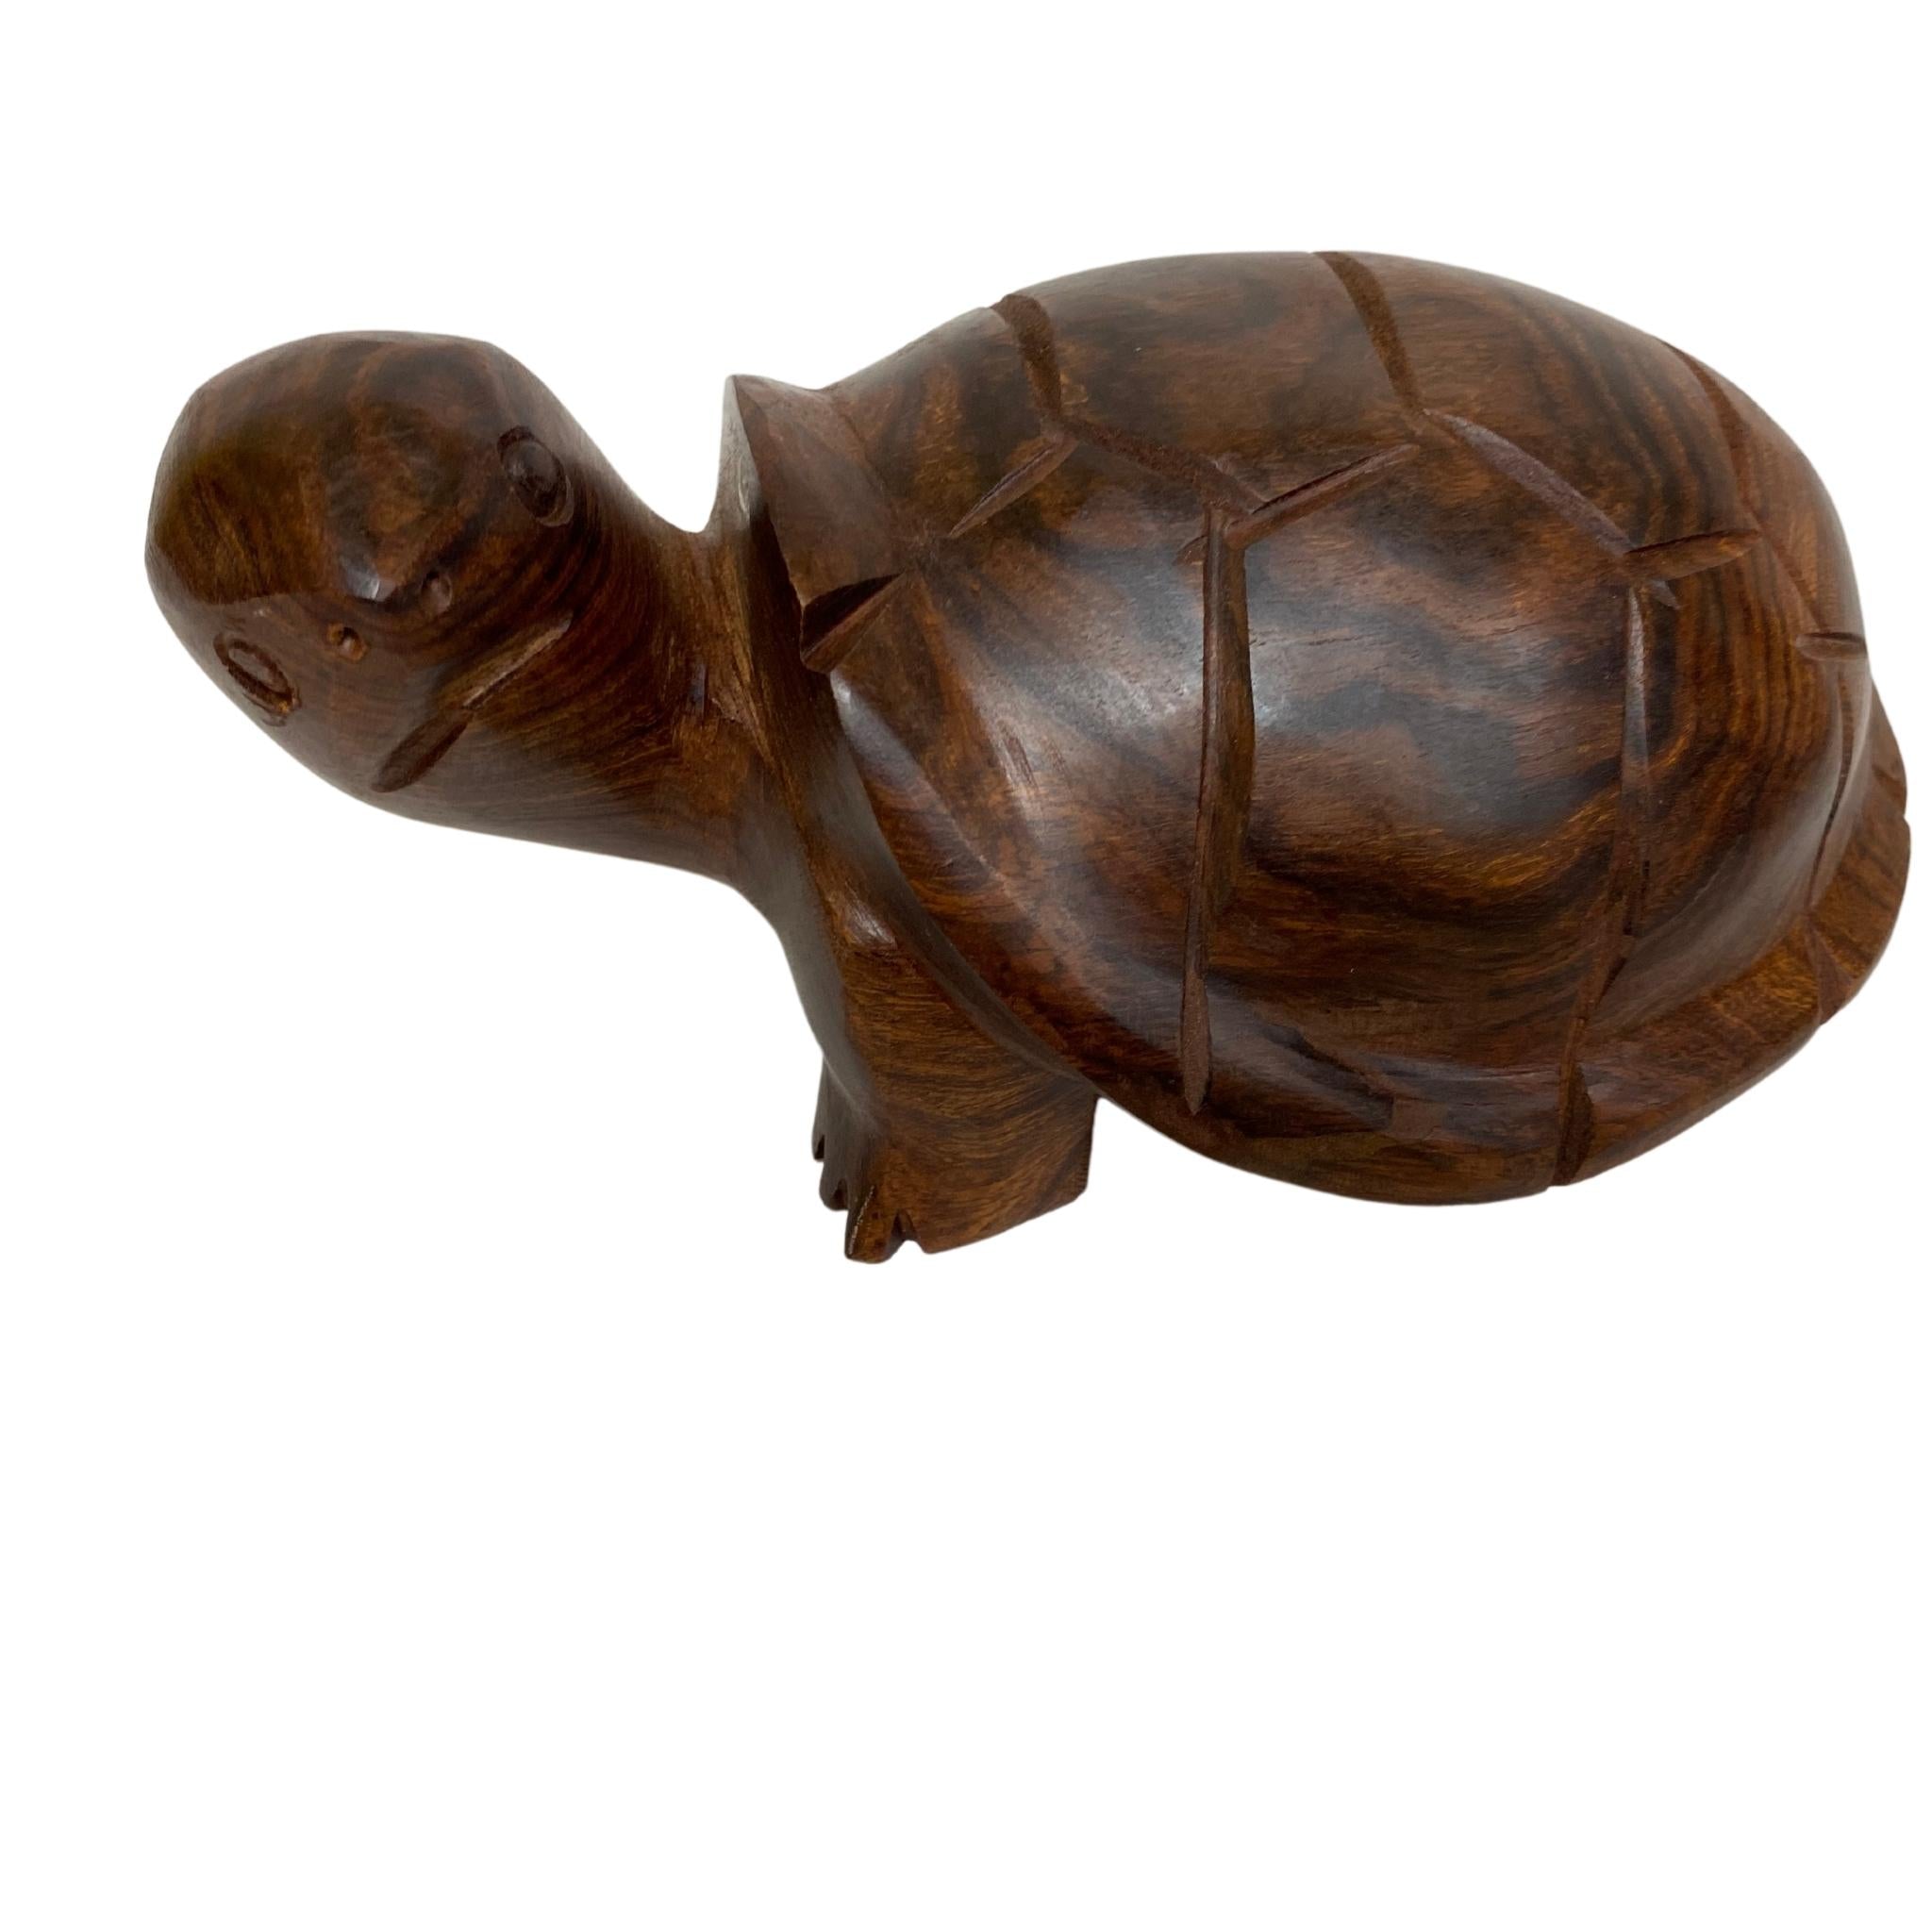 Ironwood Land Turtle made in Mexico Turtle Vintage ironwood hand carved  Desert Wood carved Turtle Wood C 6.5" - Tobmarc Home Decor & Gifts 